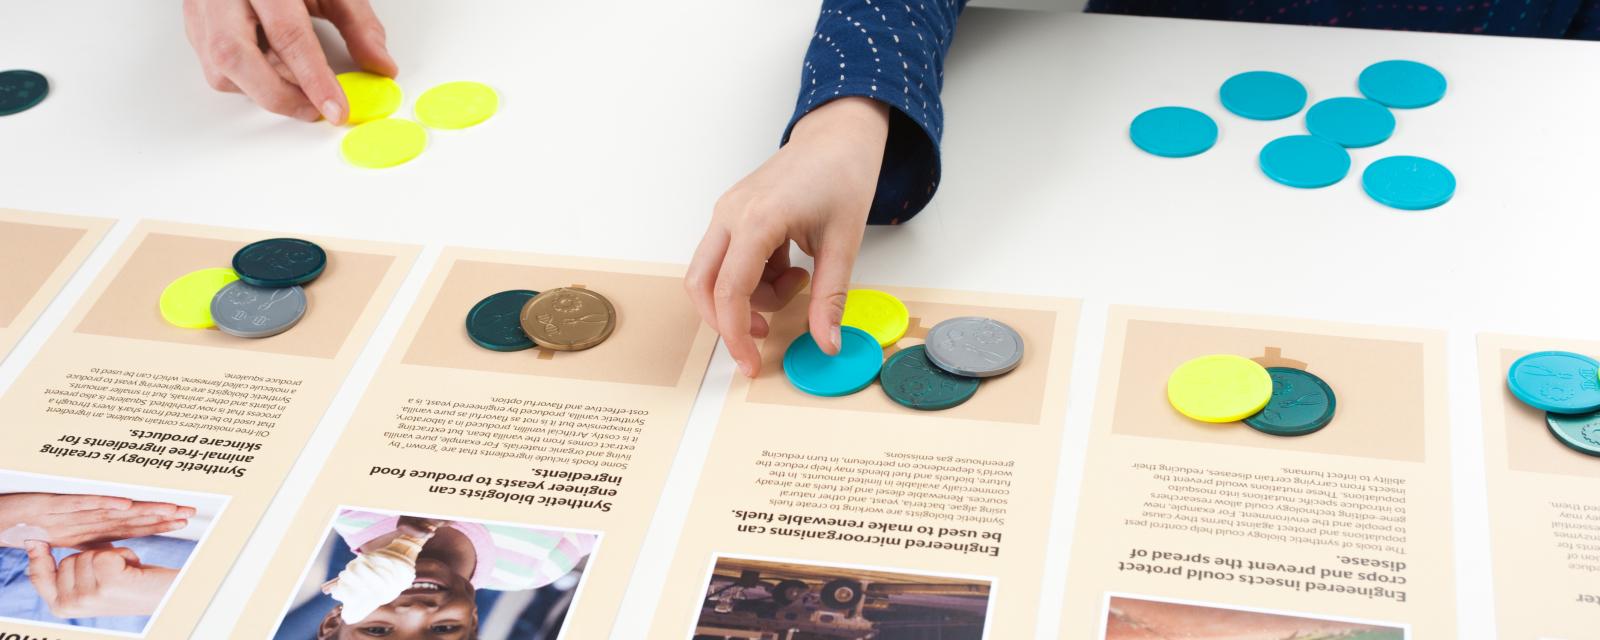 Hands sorting tokens to signify which technology is most important to them